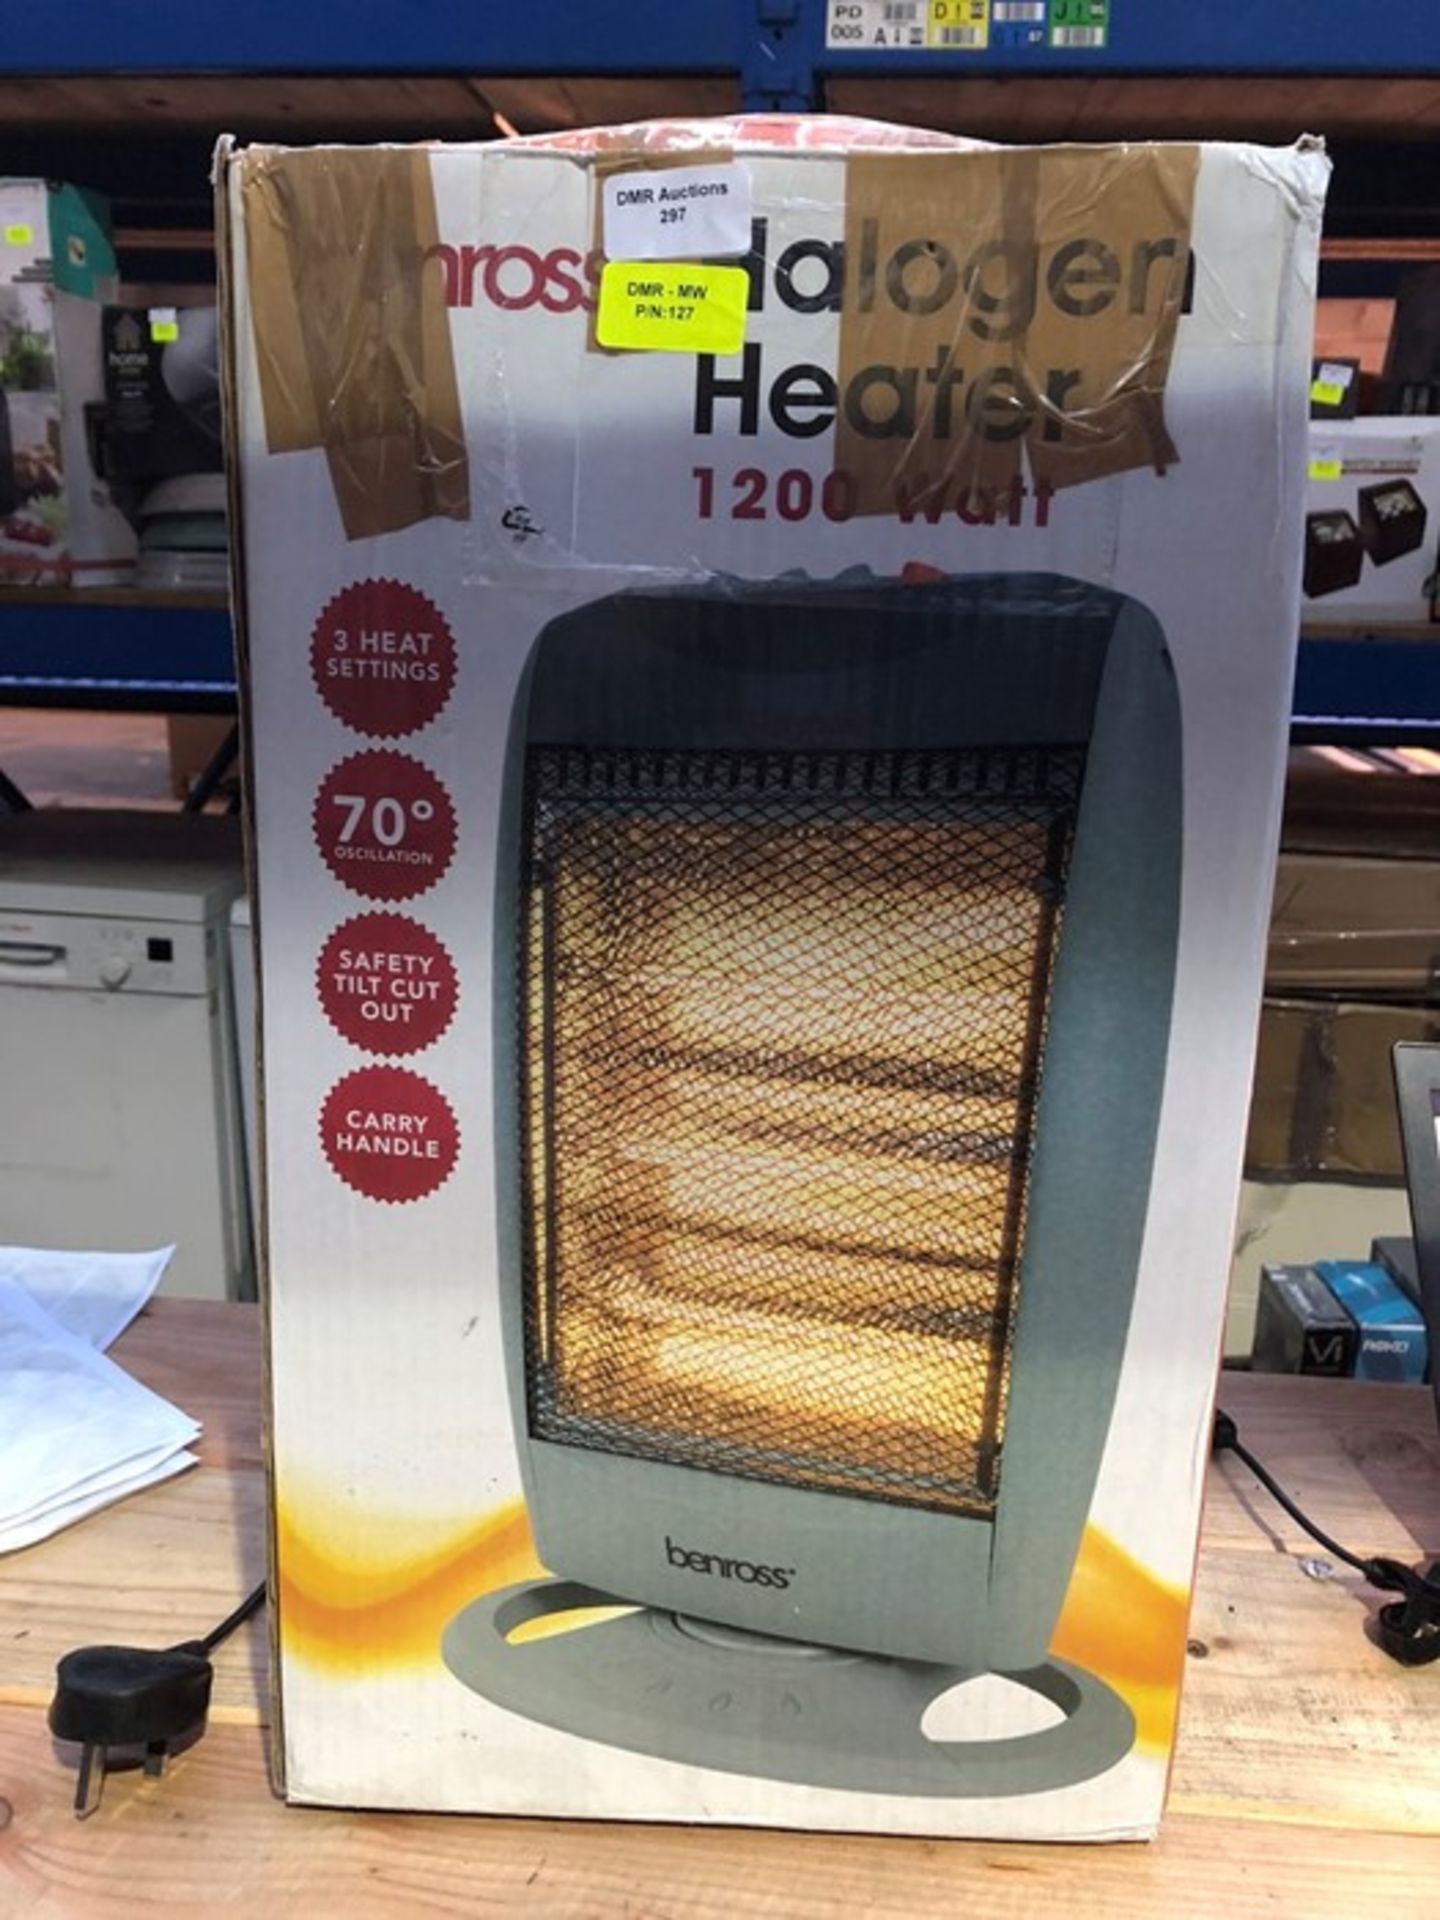 1 BOXED BENROSS 1200W HALOGEN HEATER / RRP £26.94 (PUBLIC VIEWING AVAILABLE)